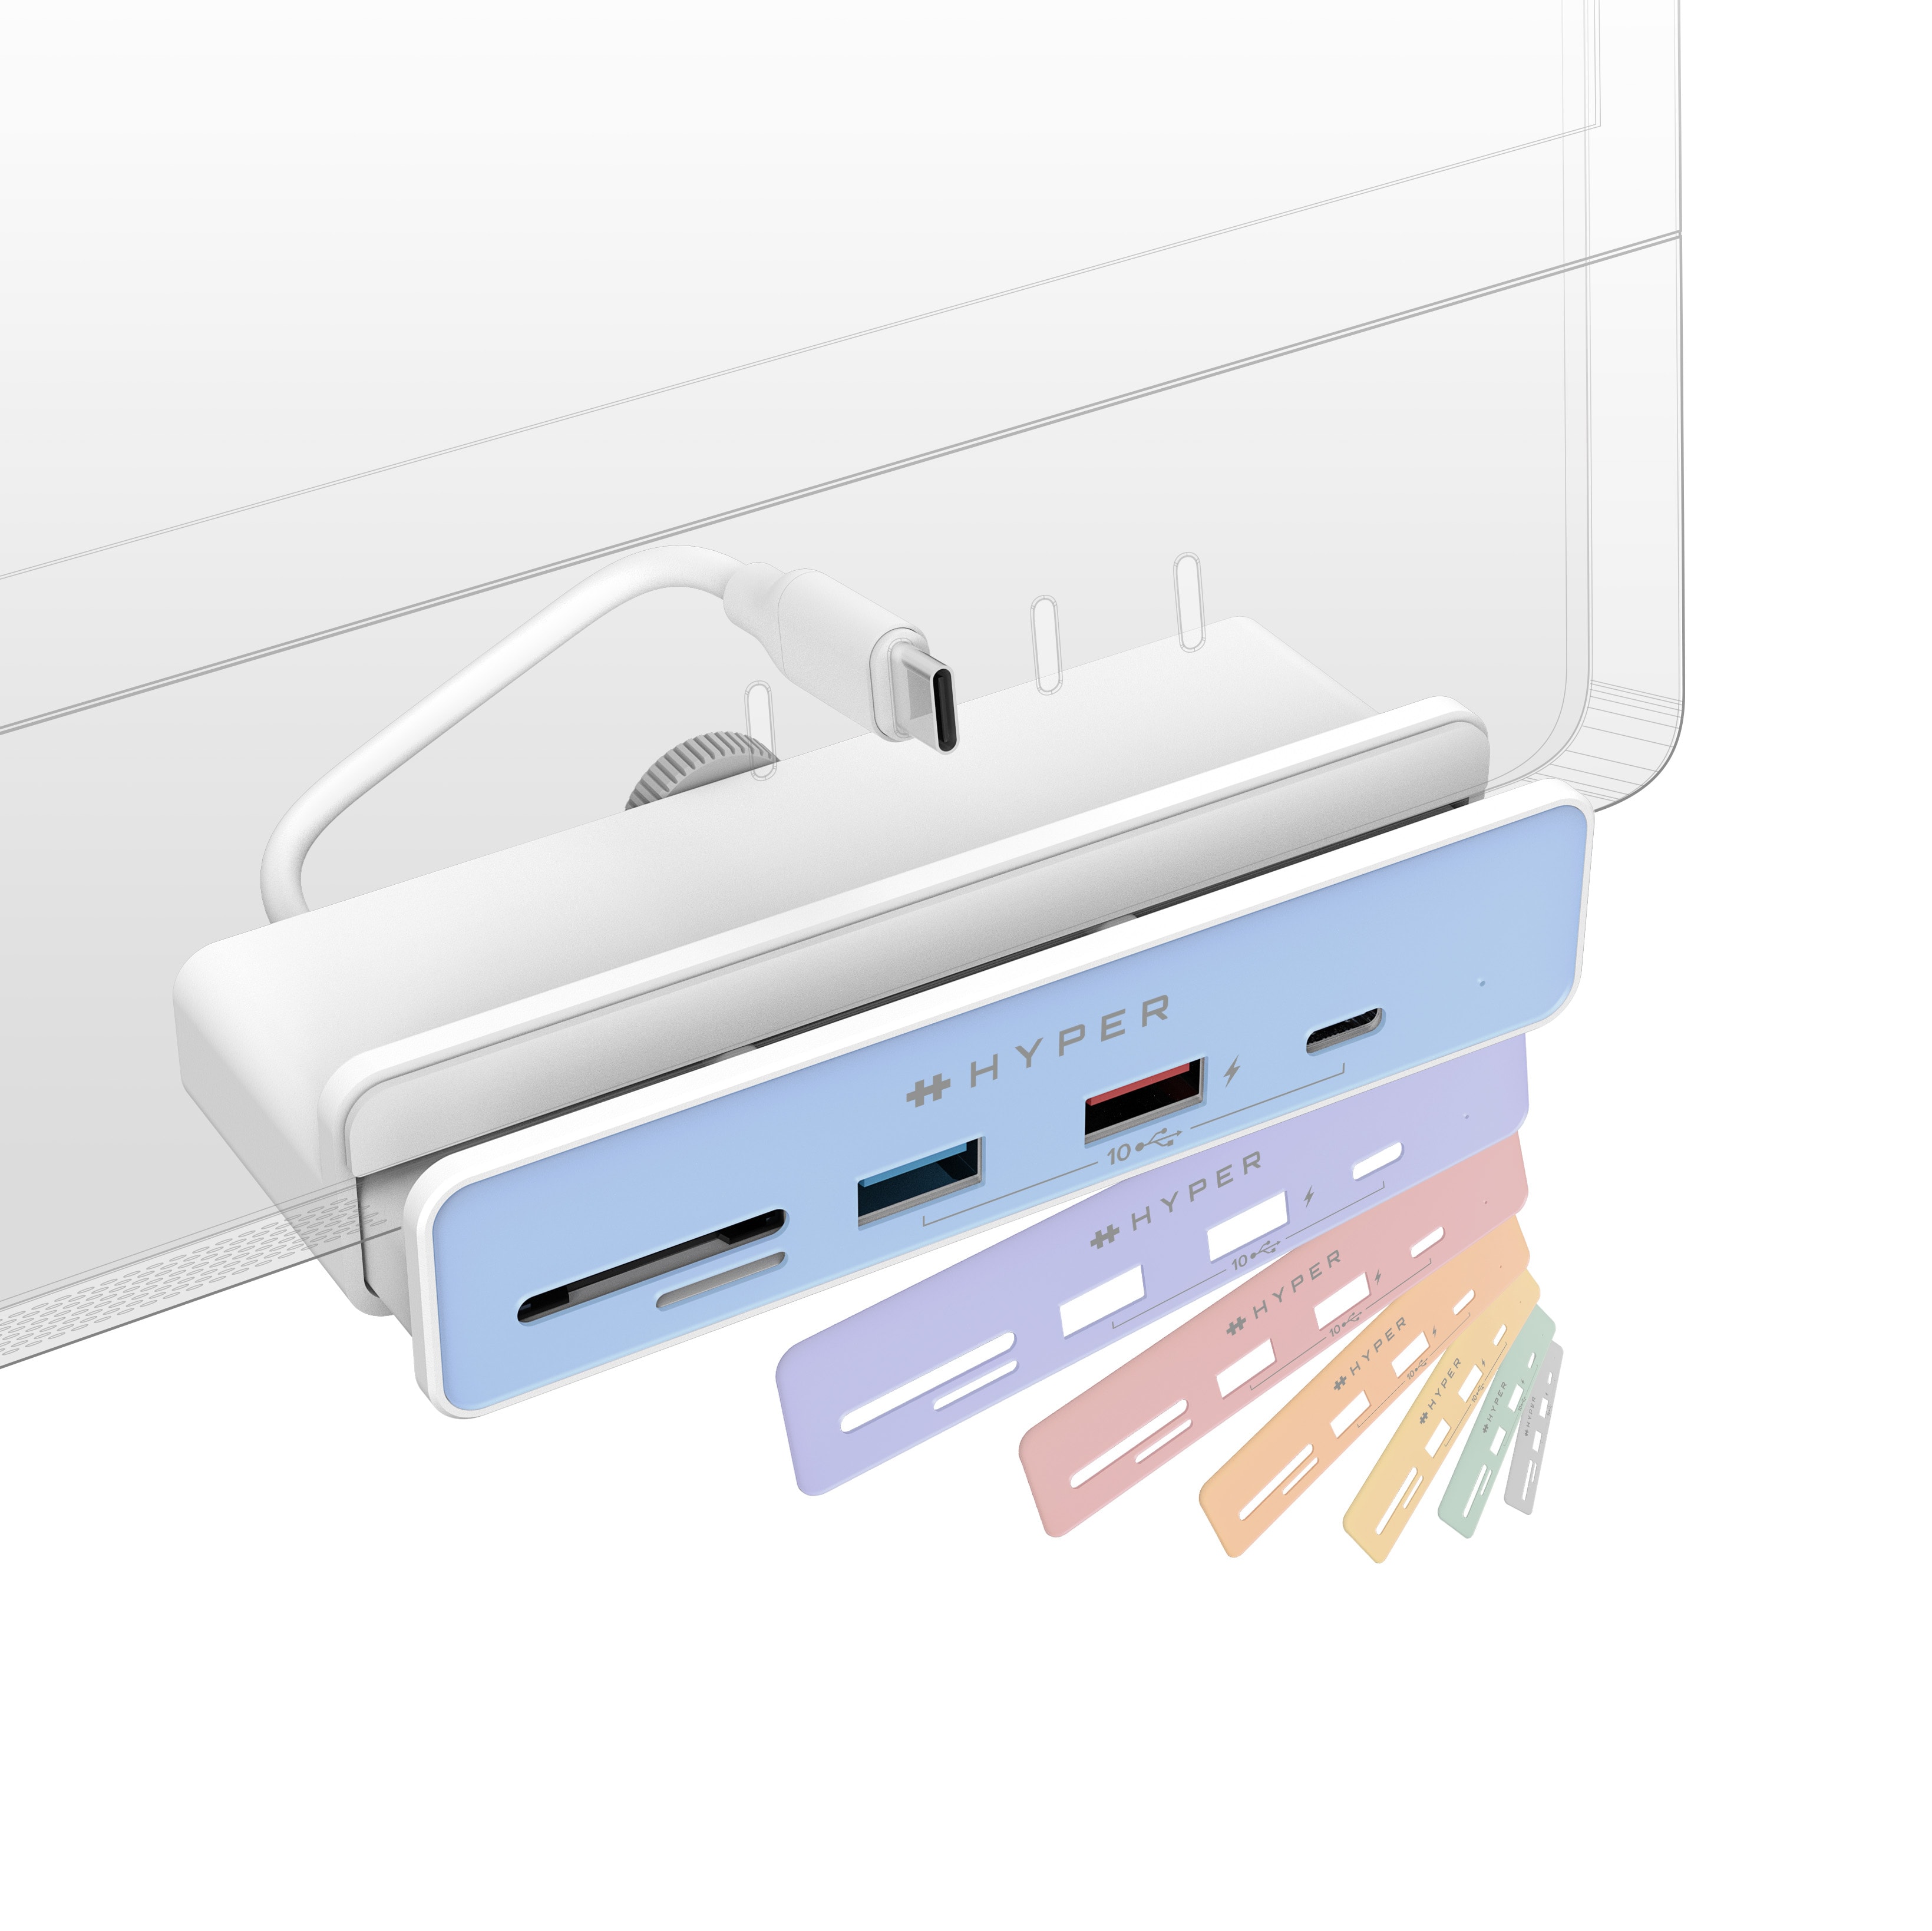 Seven colored faceplates let you match the hub to your iMac.